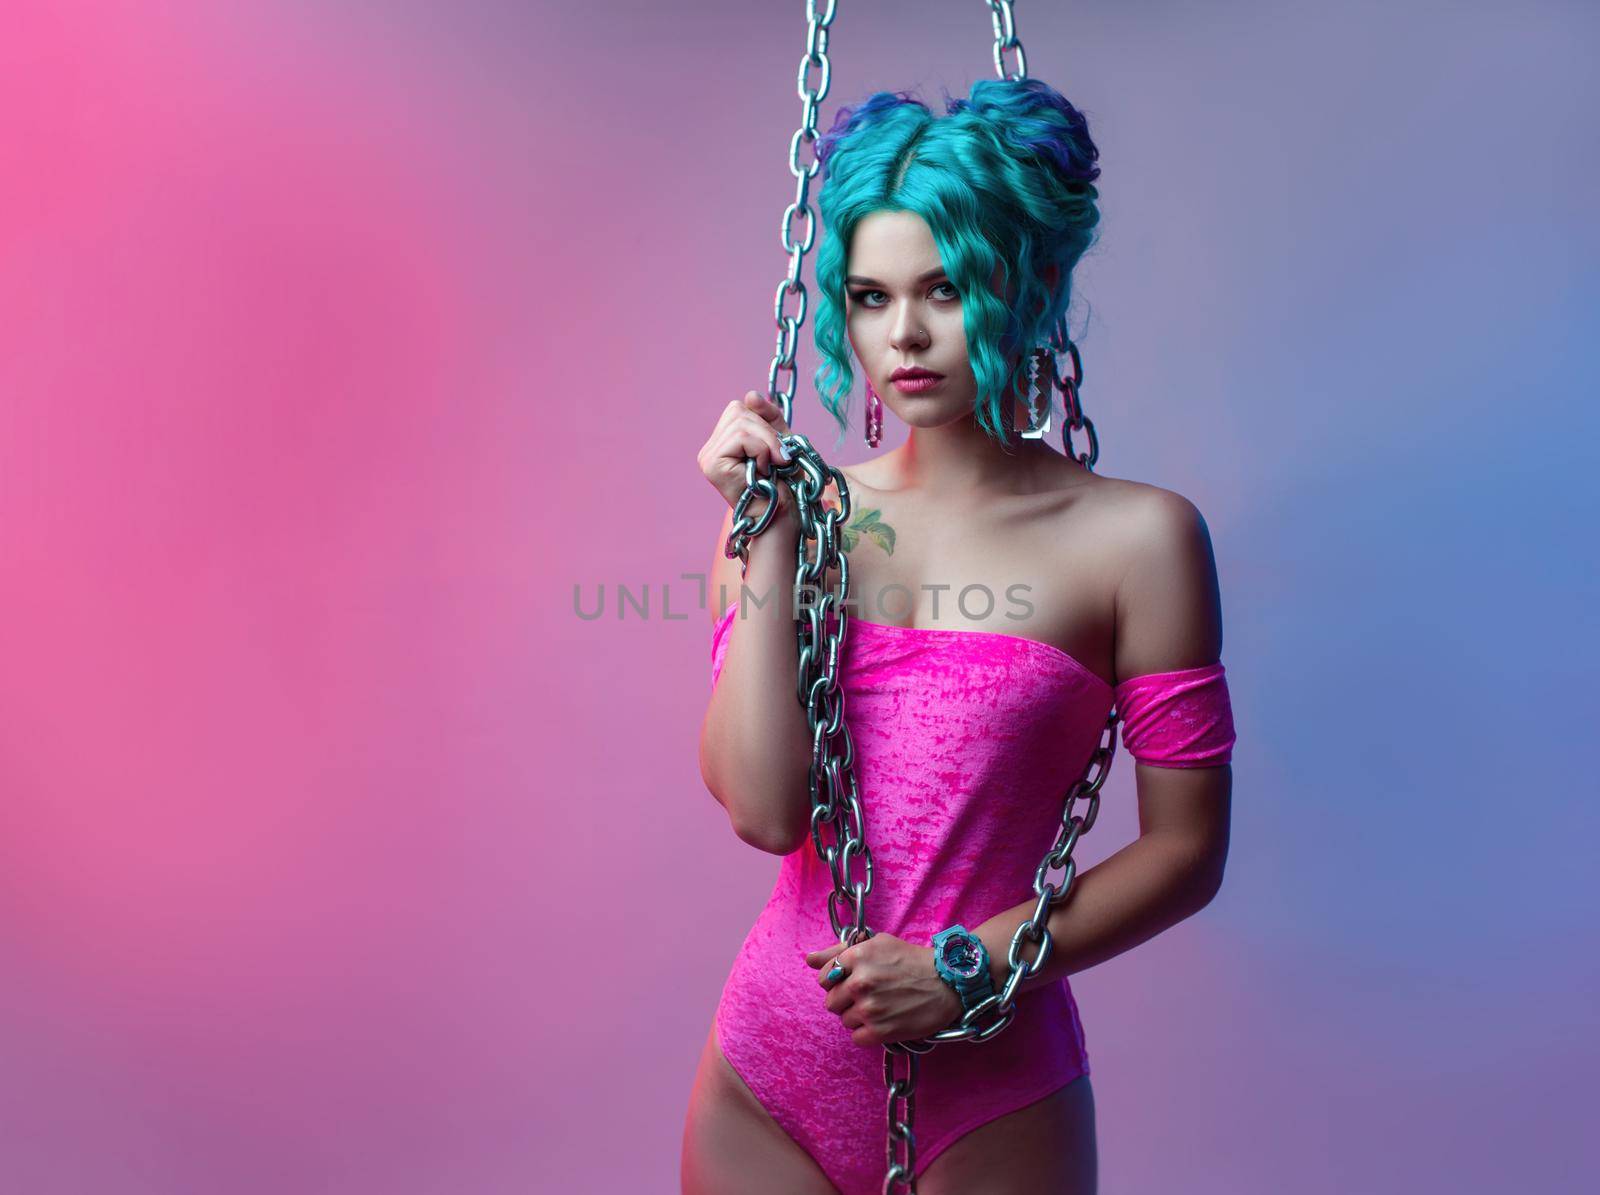 the sexy girl with colored hair in a bright pink bodysuit with a metal chain on a neon background